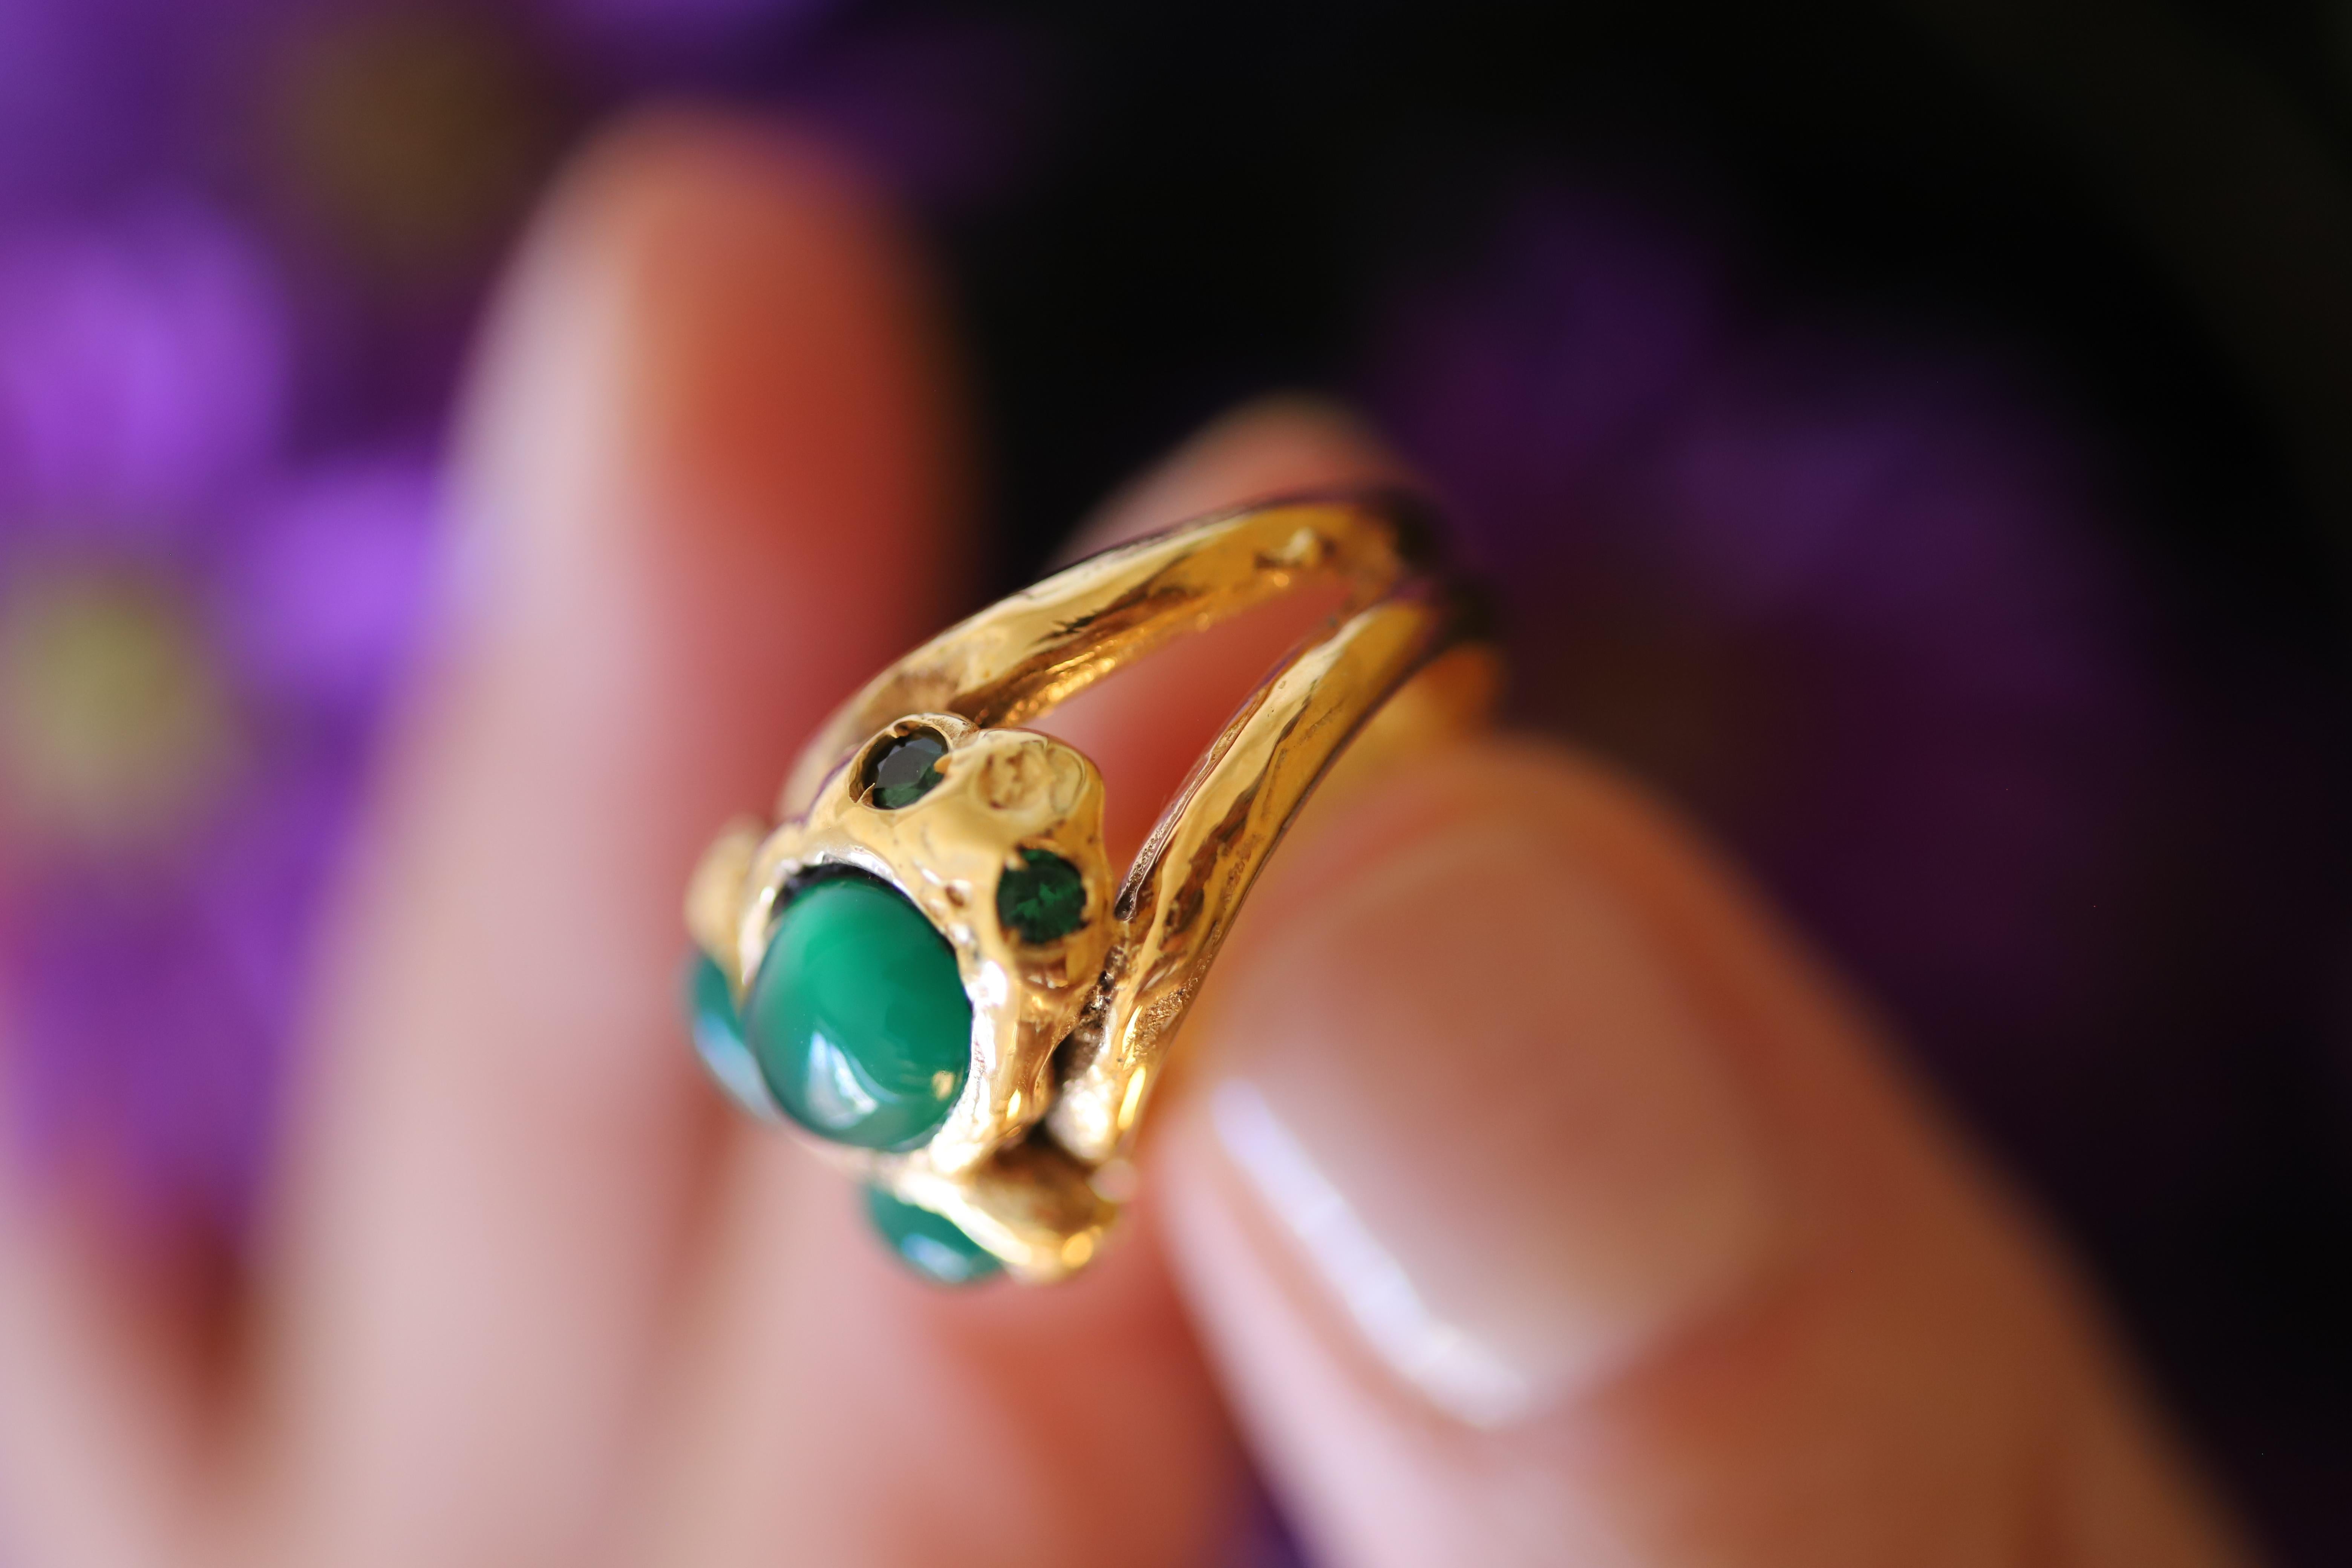 Rossella Ugolini Design Collection, surrealist Frog ring Handcrafted in 18 Karats Yellow Gold and cabochon oval cut Green Agate. The design of the ring reproduces a stylised surrealist Frog while jumping on the little finger towards infinity,